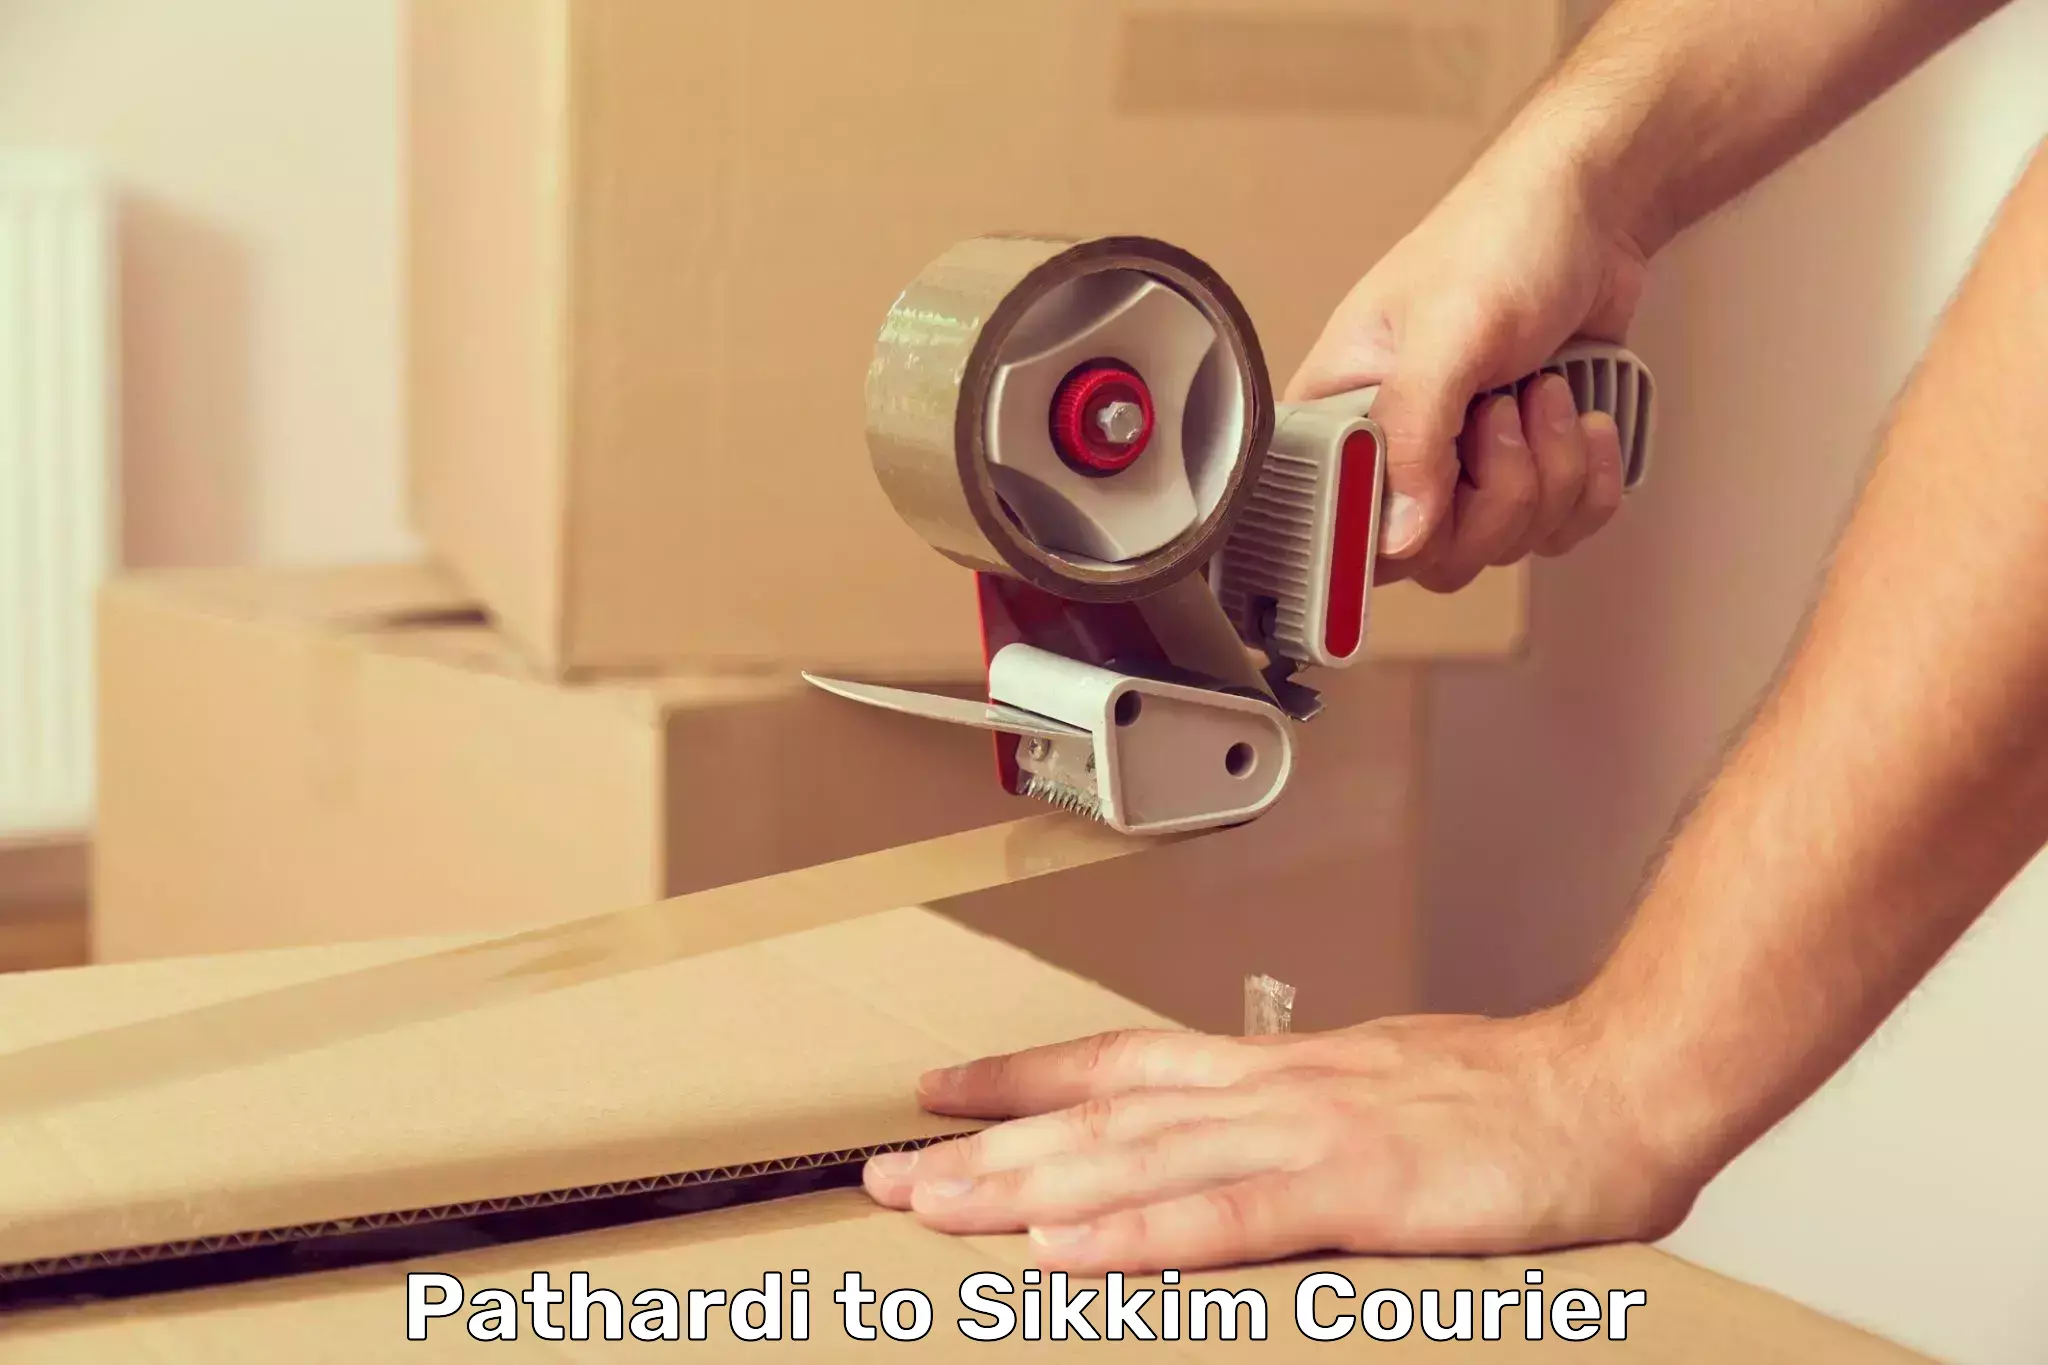 Courier service comparison Pathardi to Sikkim